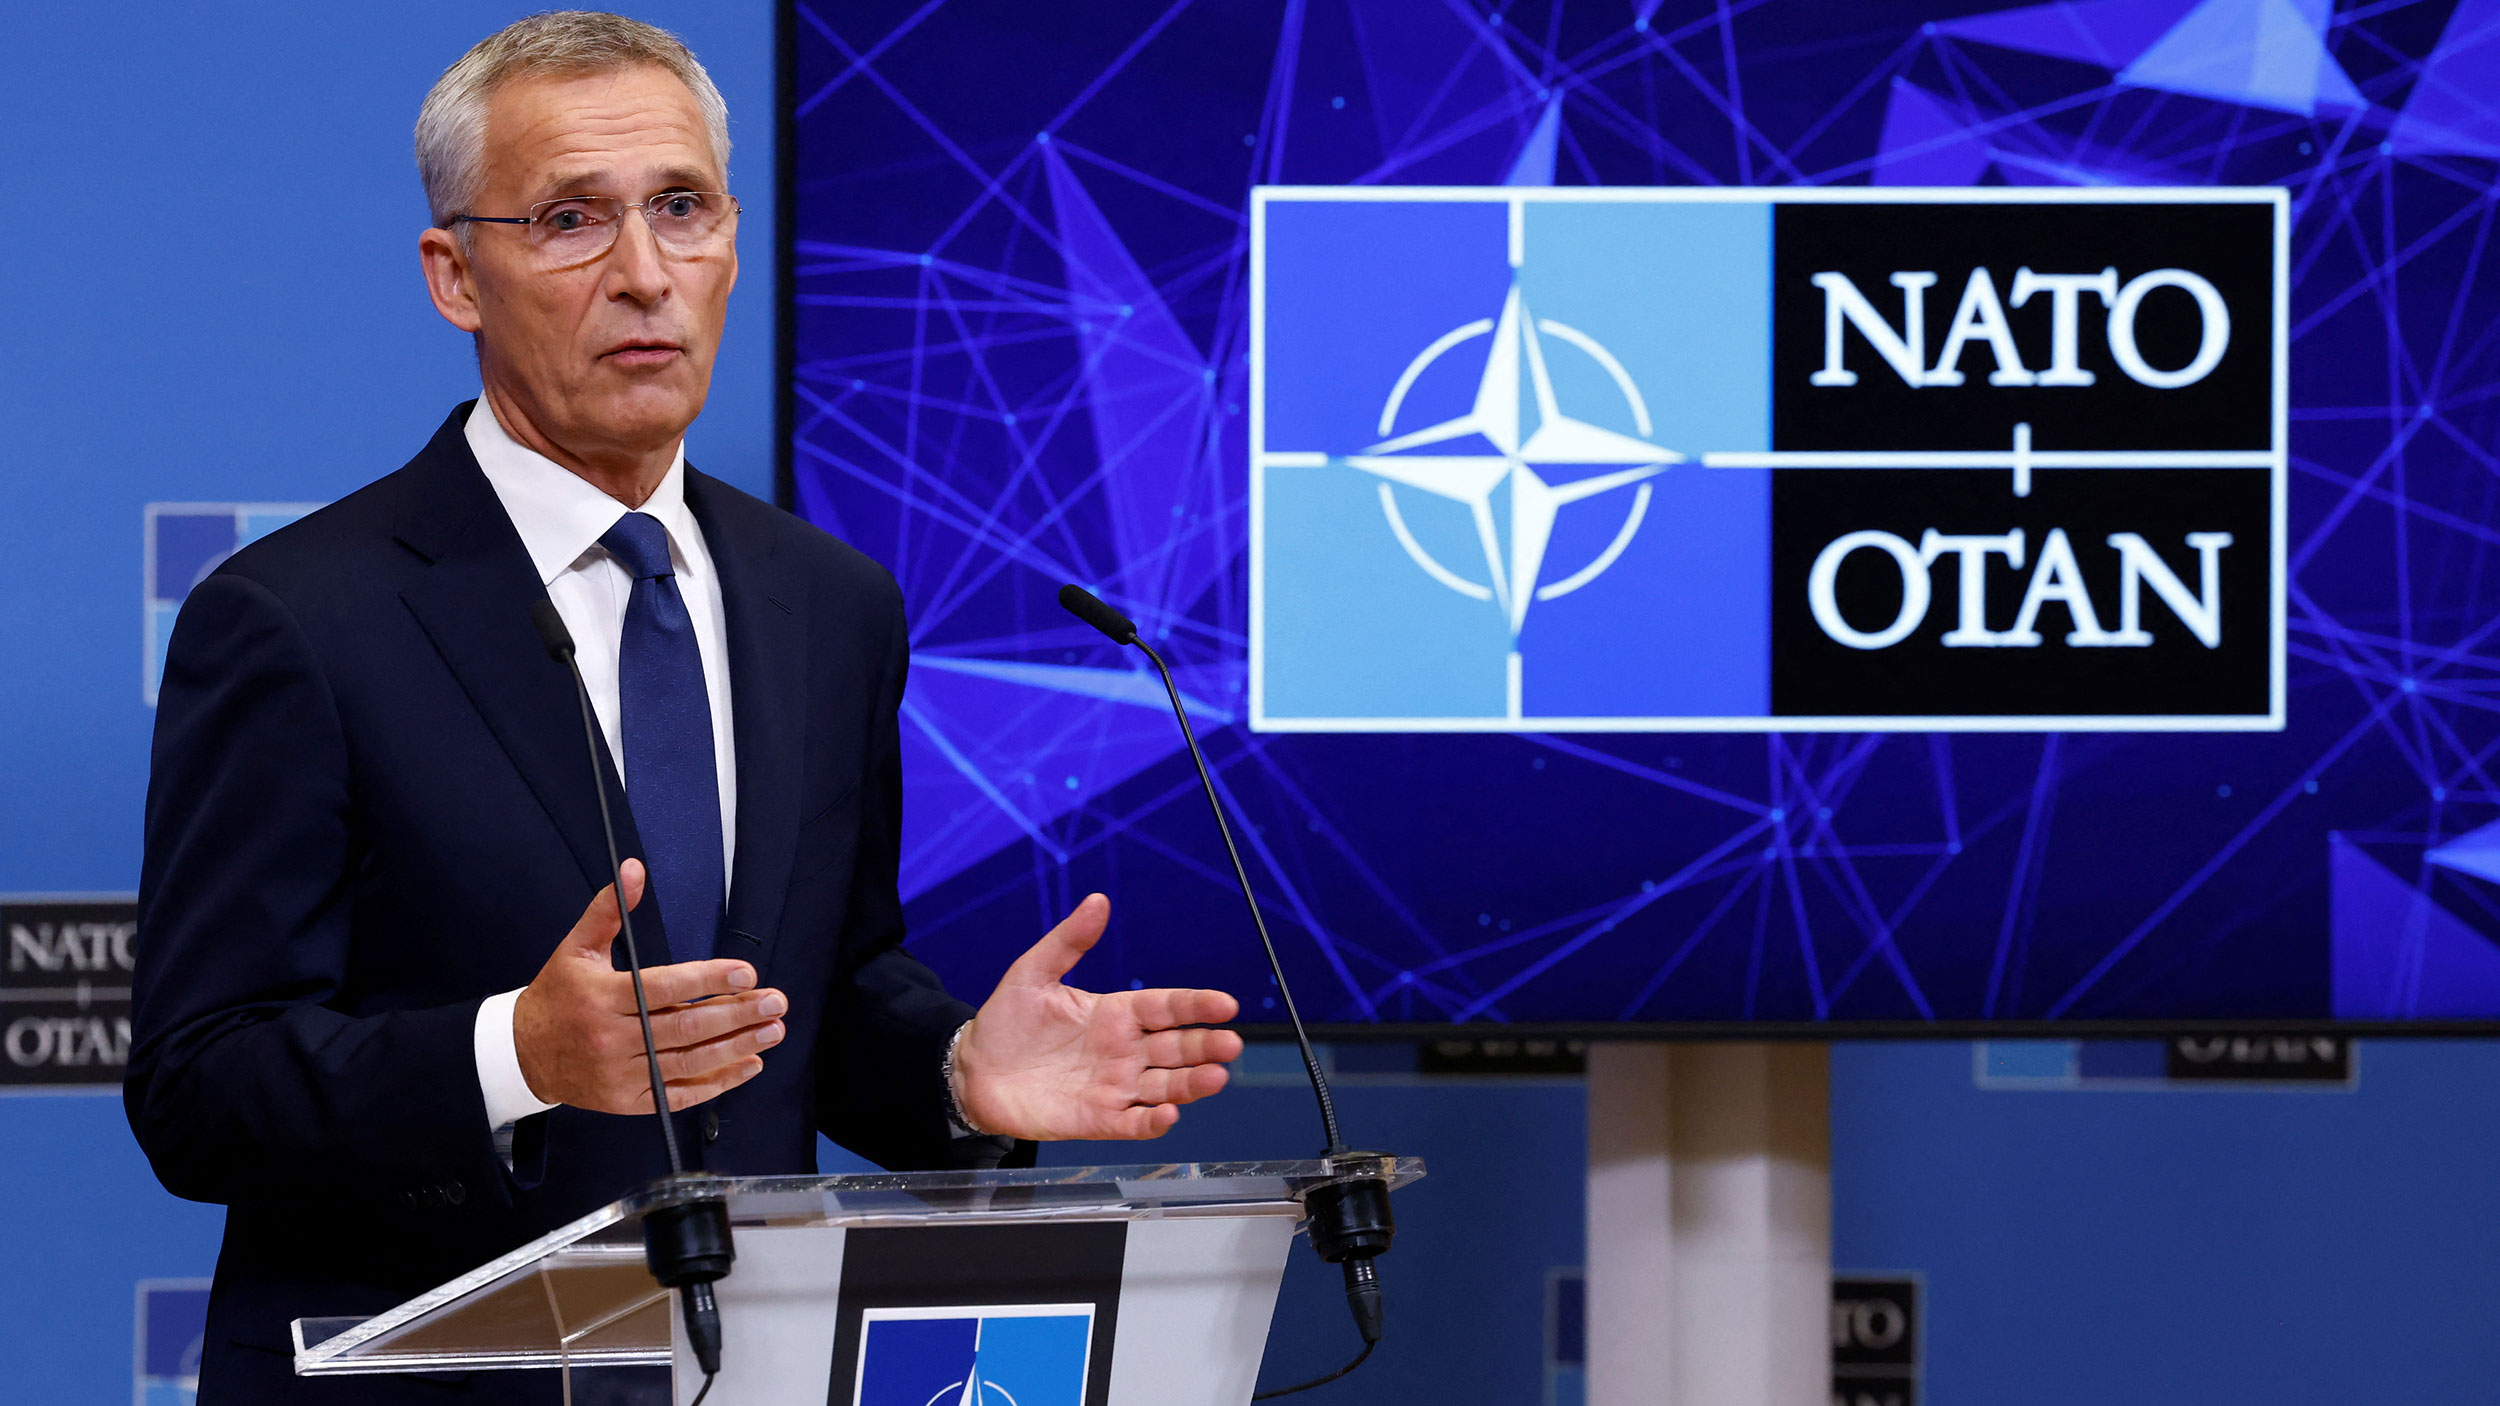 NATO Secretary General Jens Stoltenberg speaks during a news conference at the Alliance's headquarters in Brussels, Belgium on September 30.